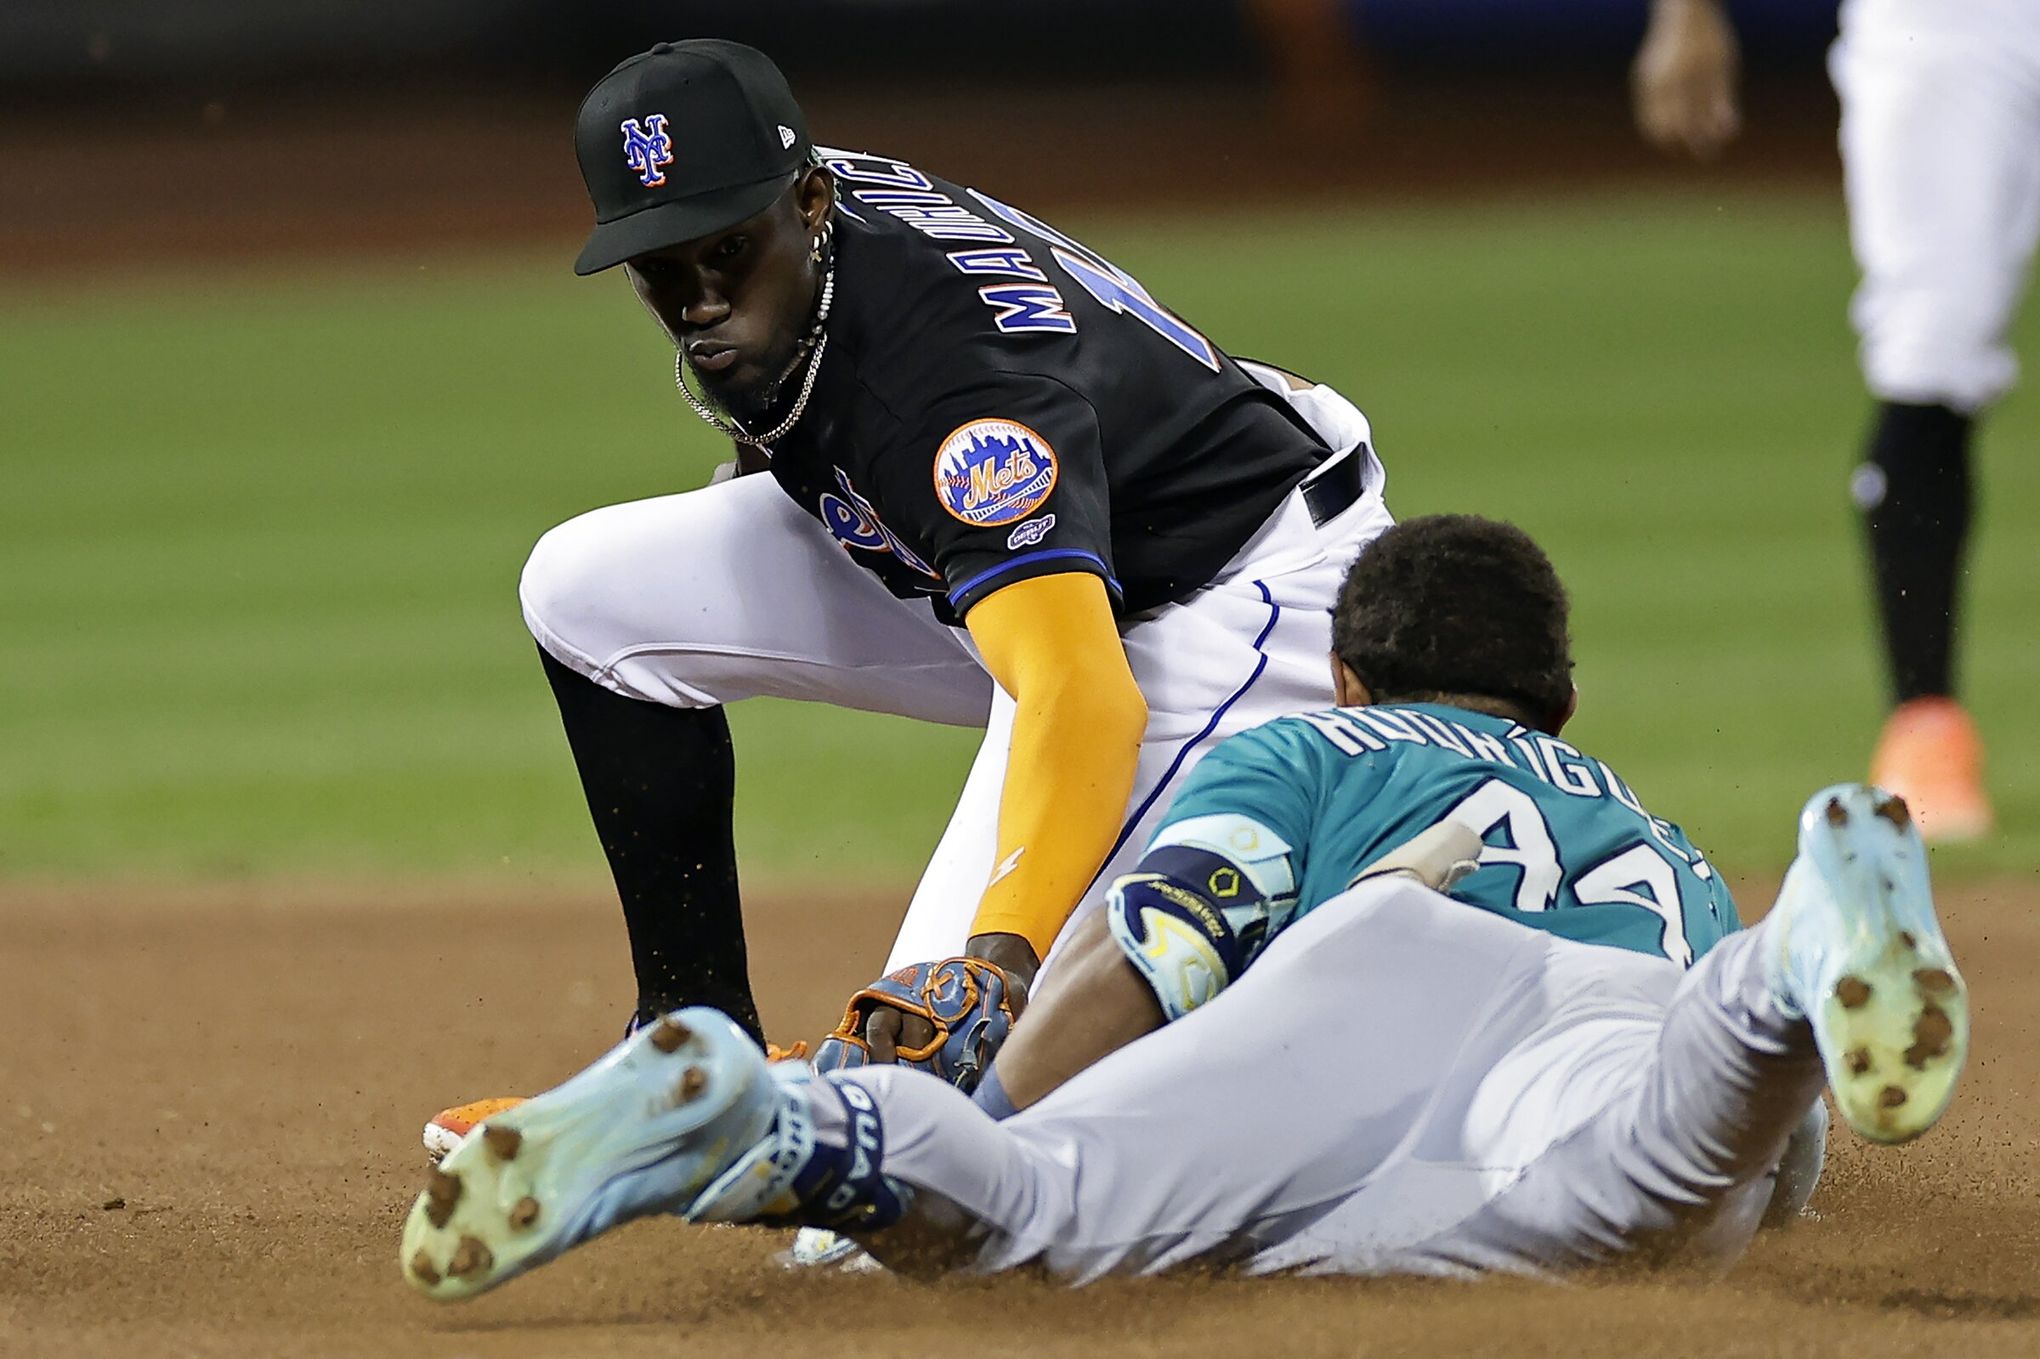 Mariners' bats don't have much pop in road-trip opening loss to Mets